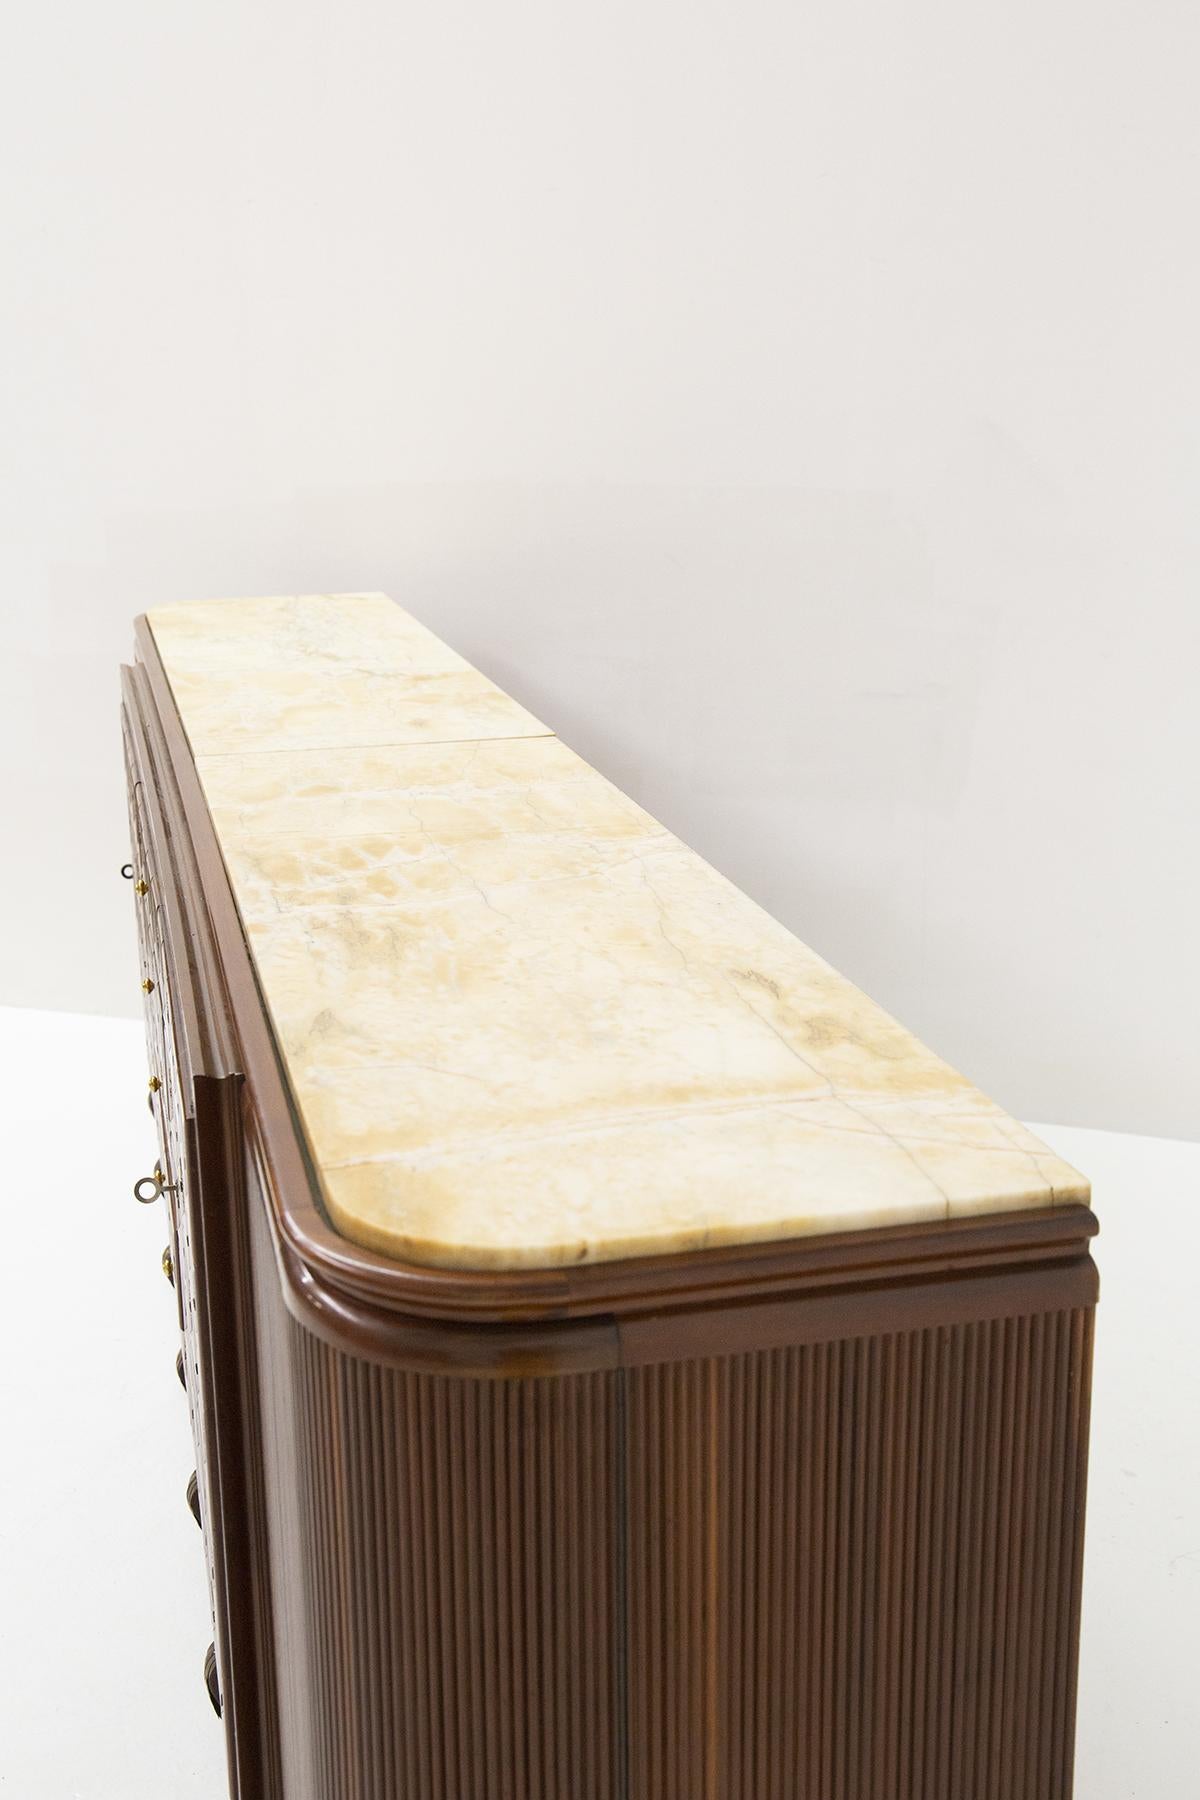 Gino Rancati Rare Wood and Marble Sideboard, Published For Sale 11